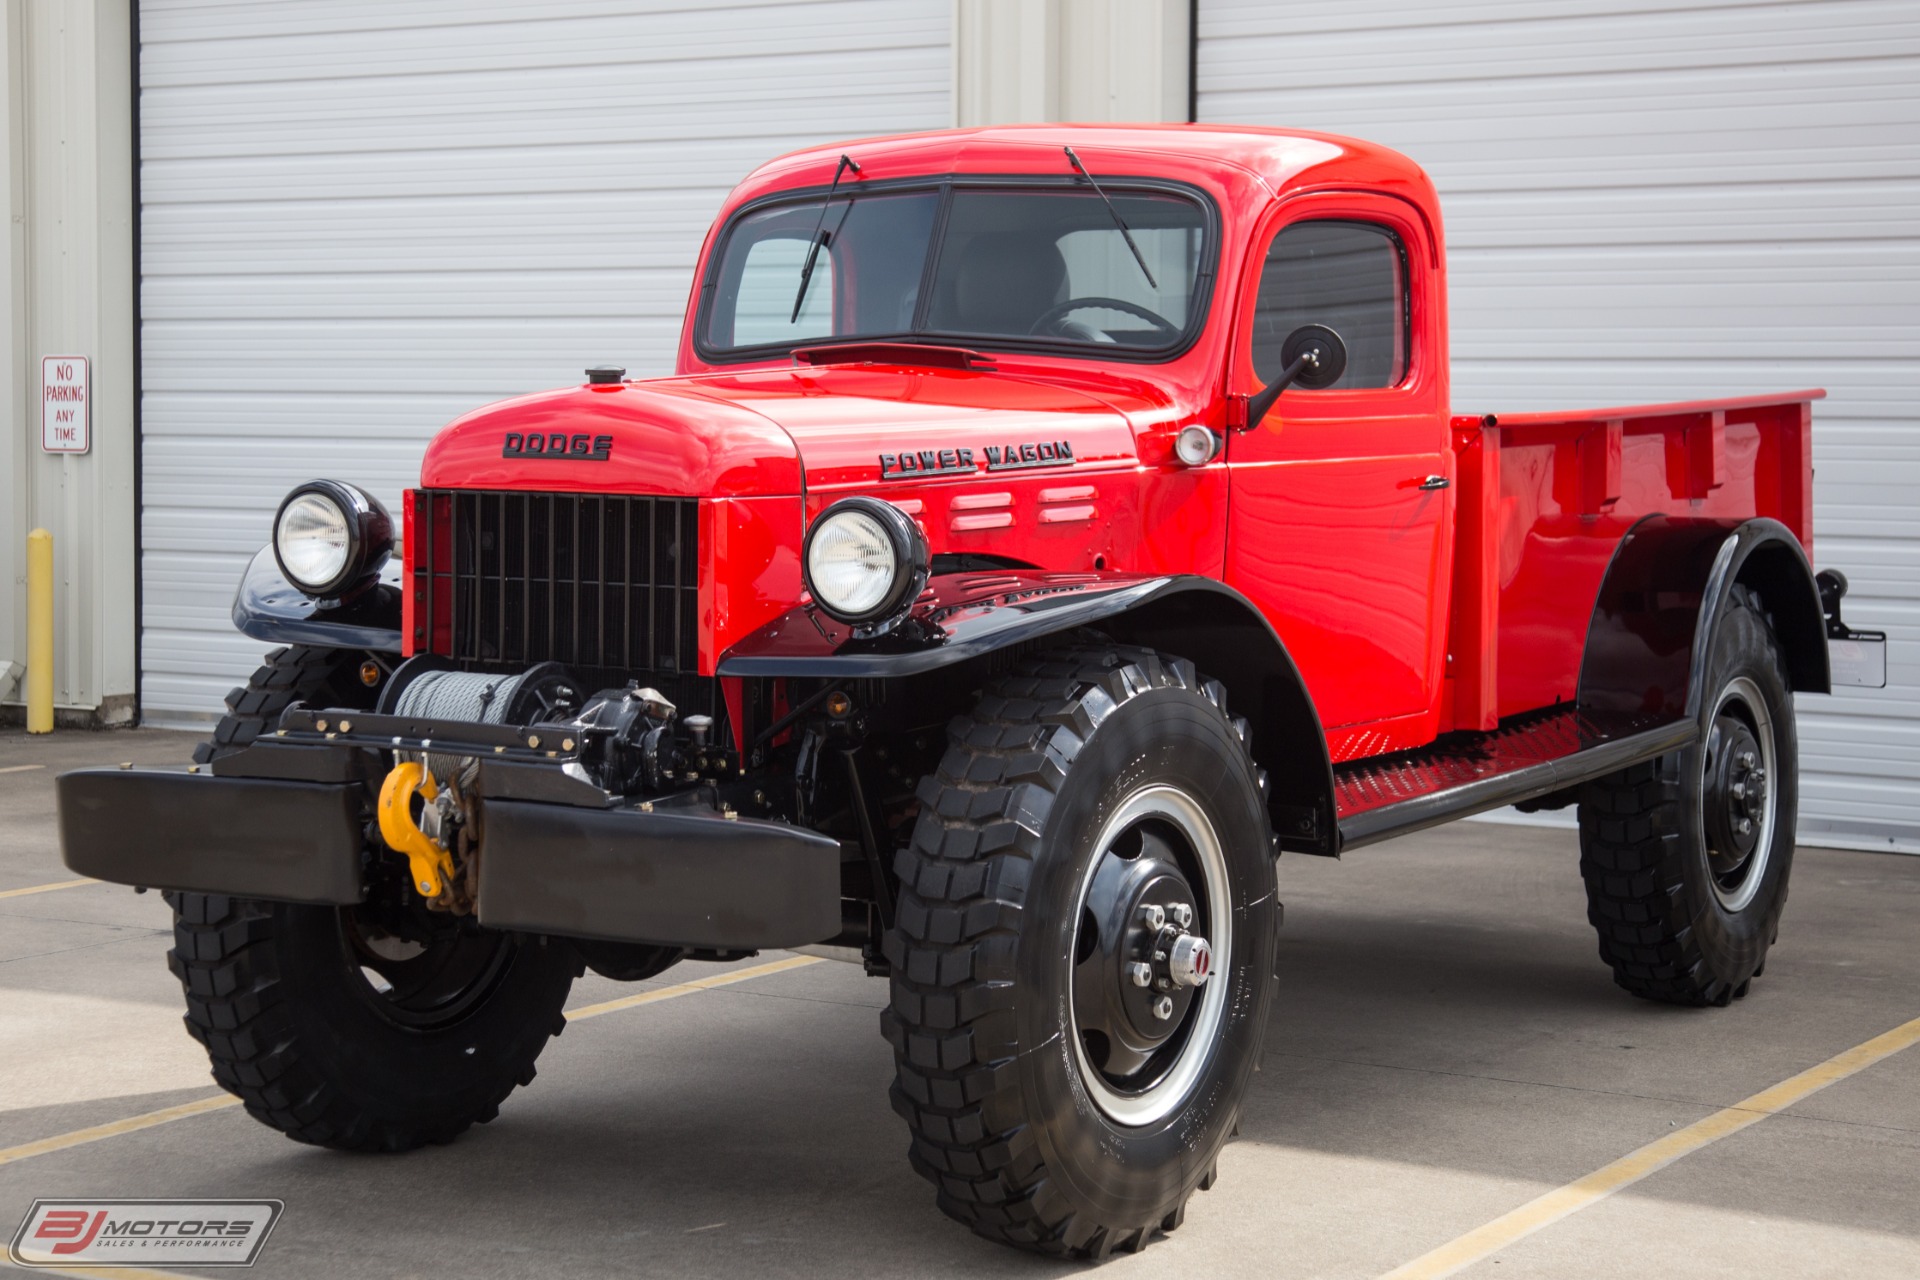 Used 1950 Dodge Power Wagon Full Restoration For Sale ...